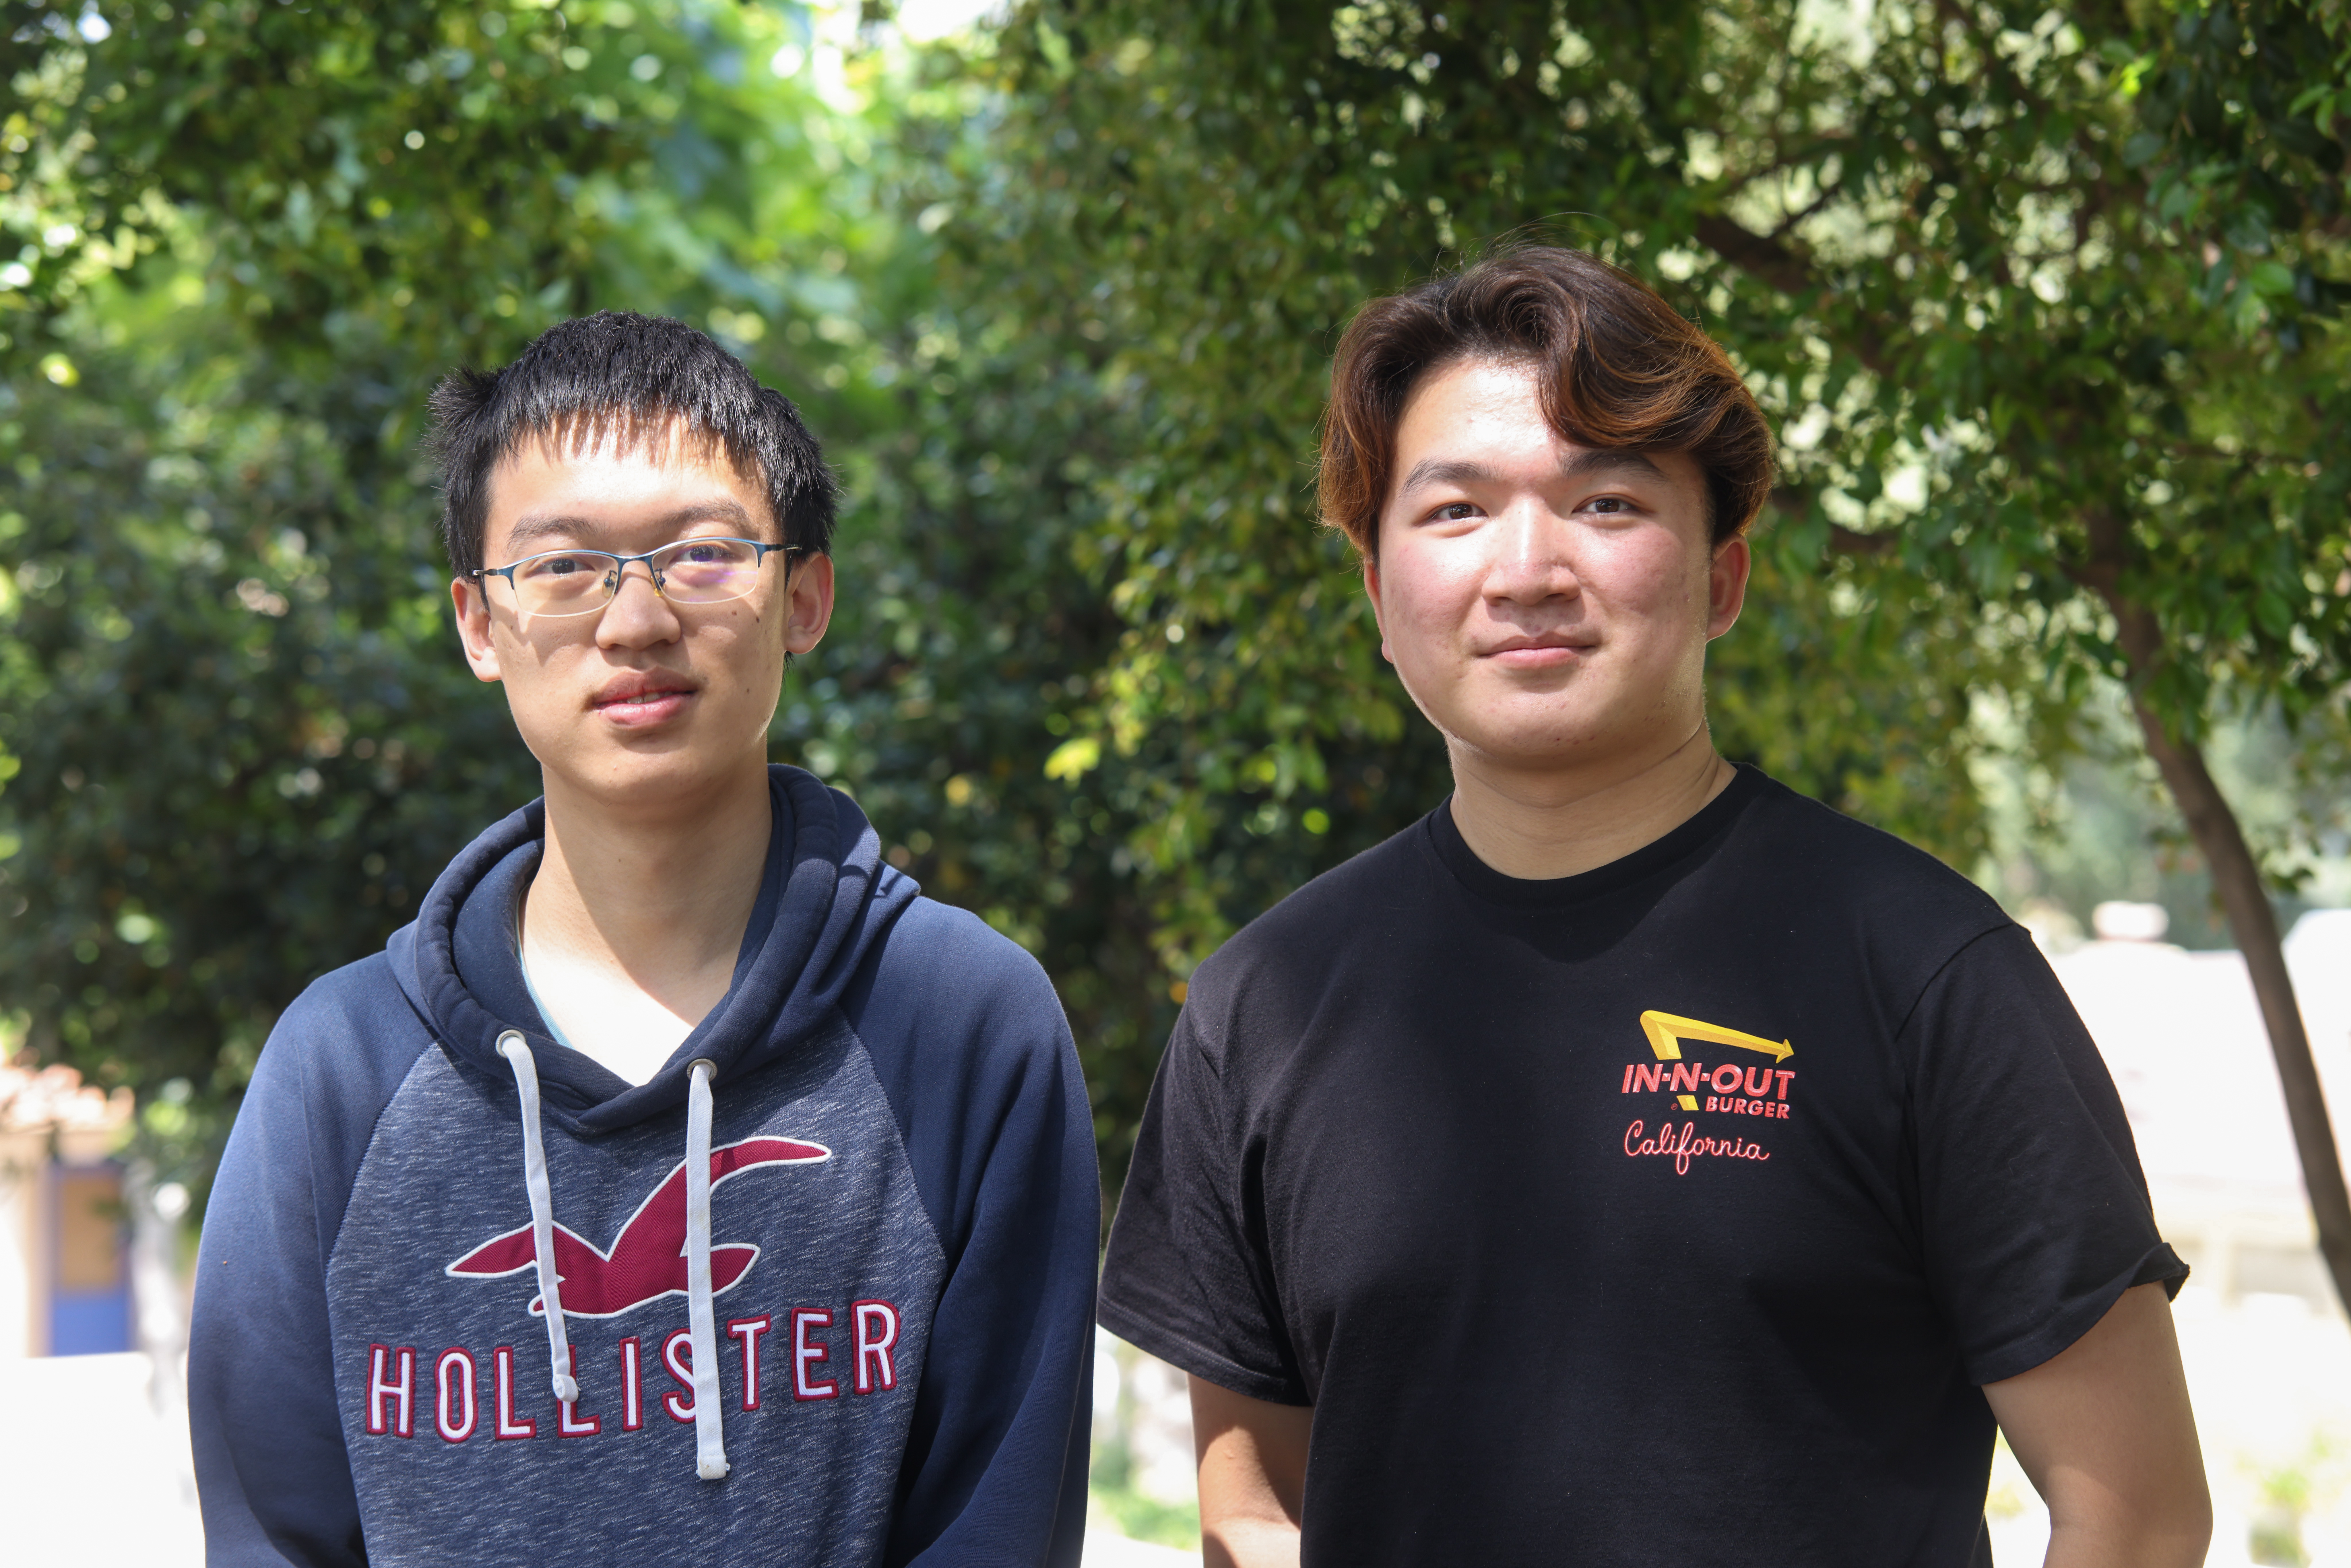 Webb seniors Jonathan Yu ’22 and Roy Zhang ’22 will travel to New York City on May 10 to see the smash musical “Hamilton” after winning one of 10 prizes in the annual Gilder Lehrman Institute of American History Hamilton Education Program Online contest.